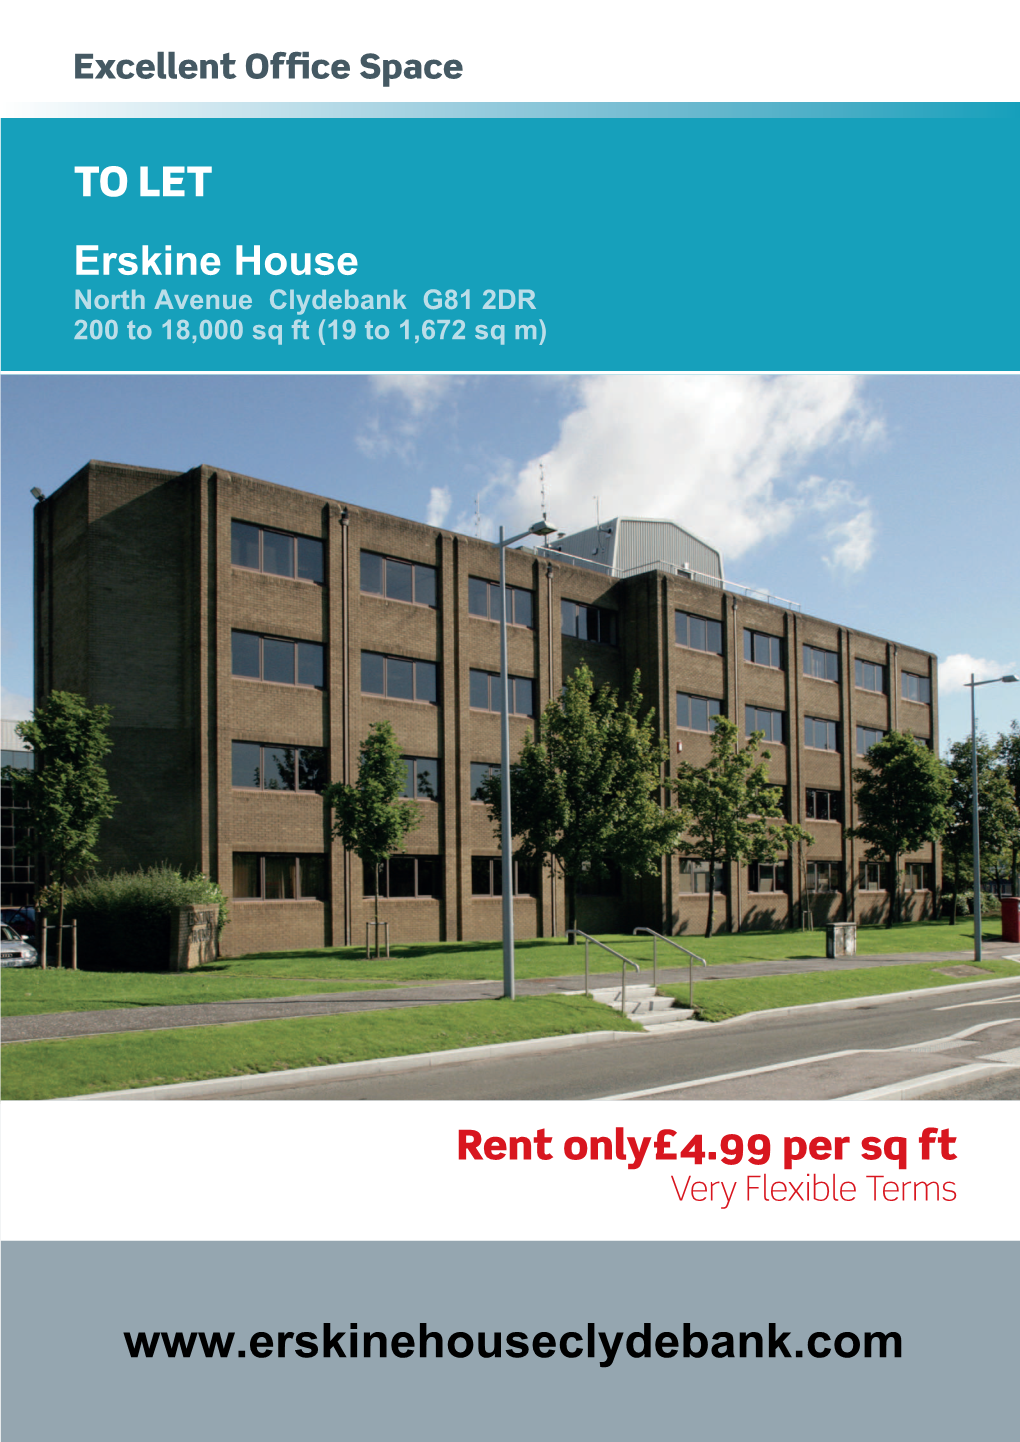 Erskine House North Avenue Clydebank G81 2DR 200 to 18000 Sq Ft